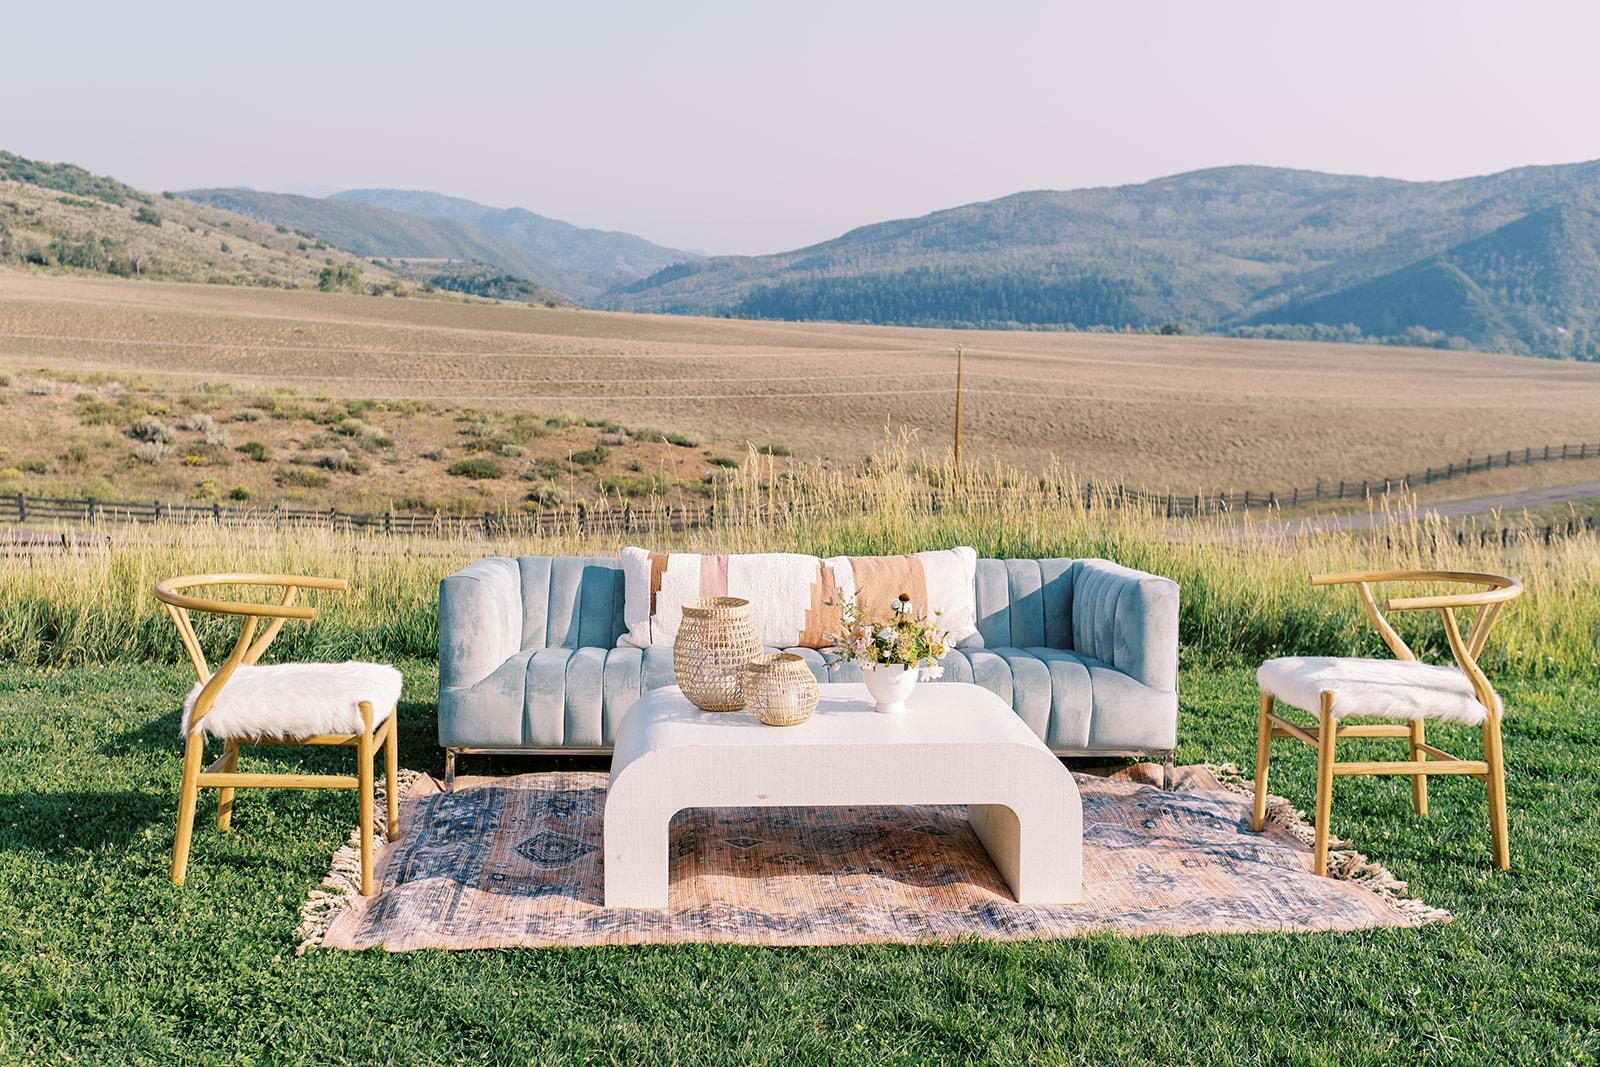 This Chic Colorado Celebration Is Filled With Carefully Curated Details